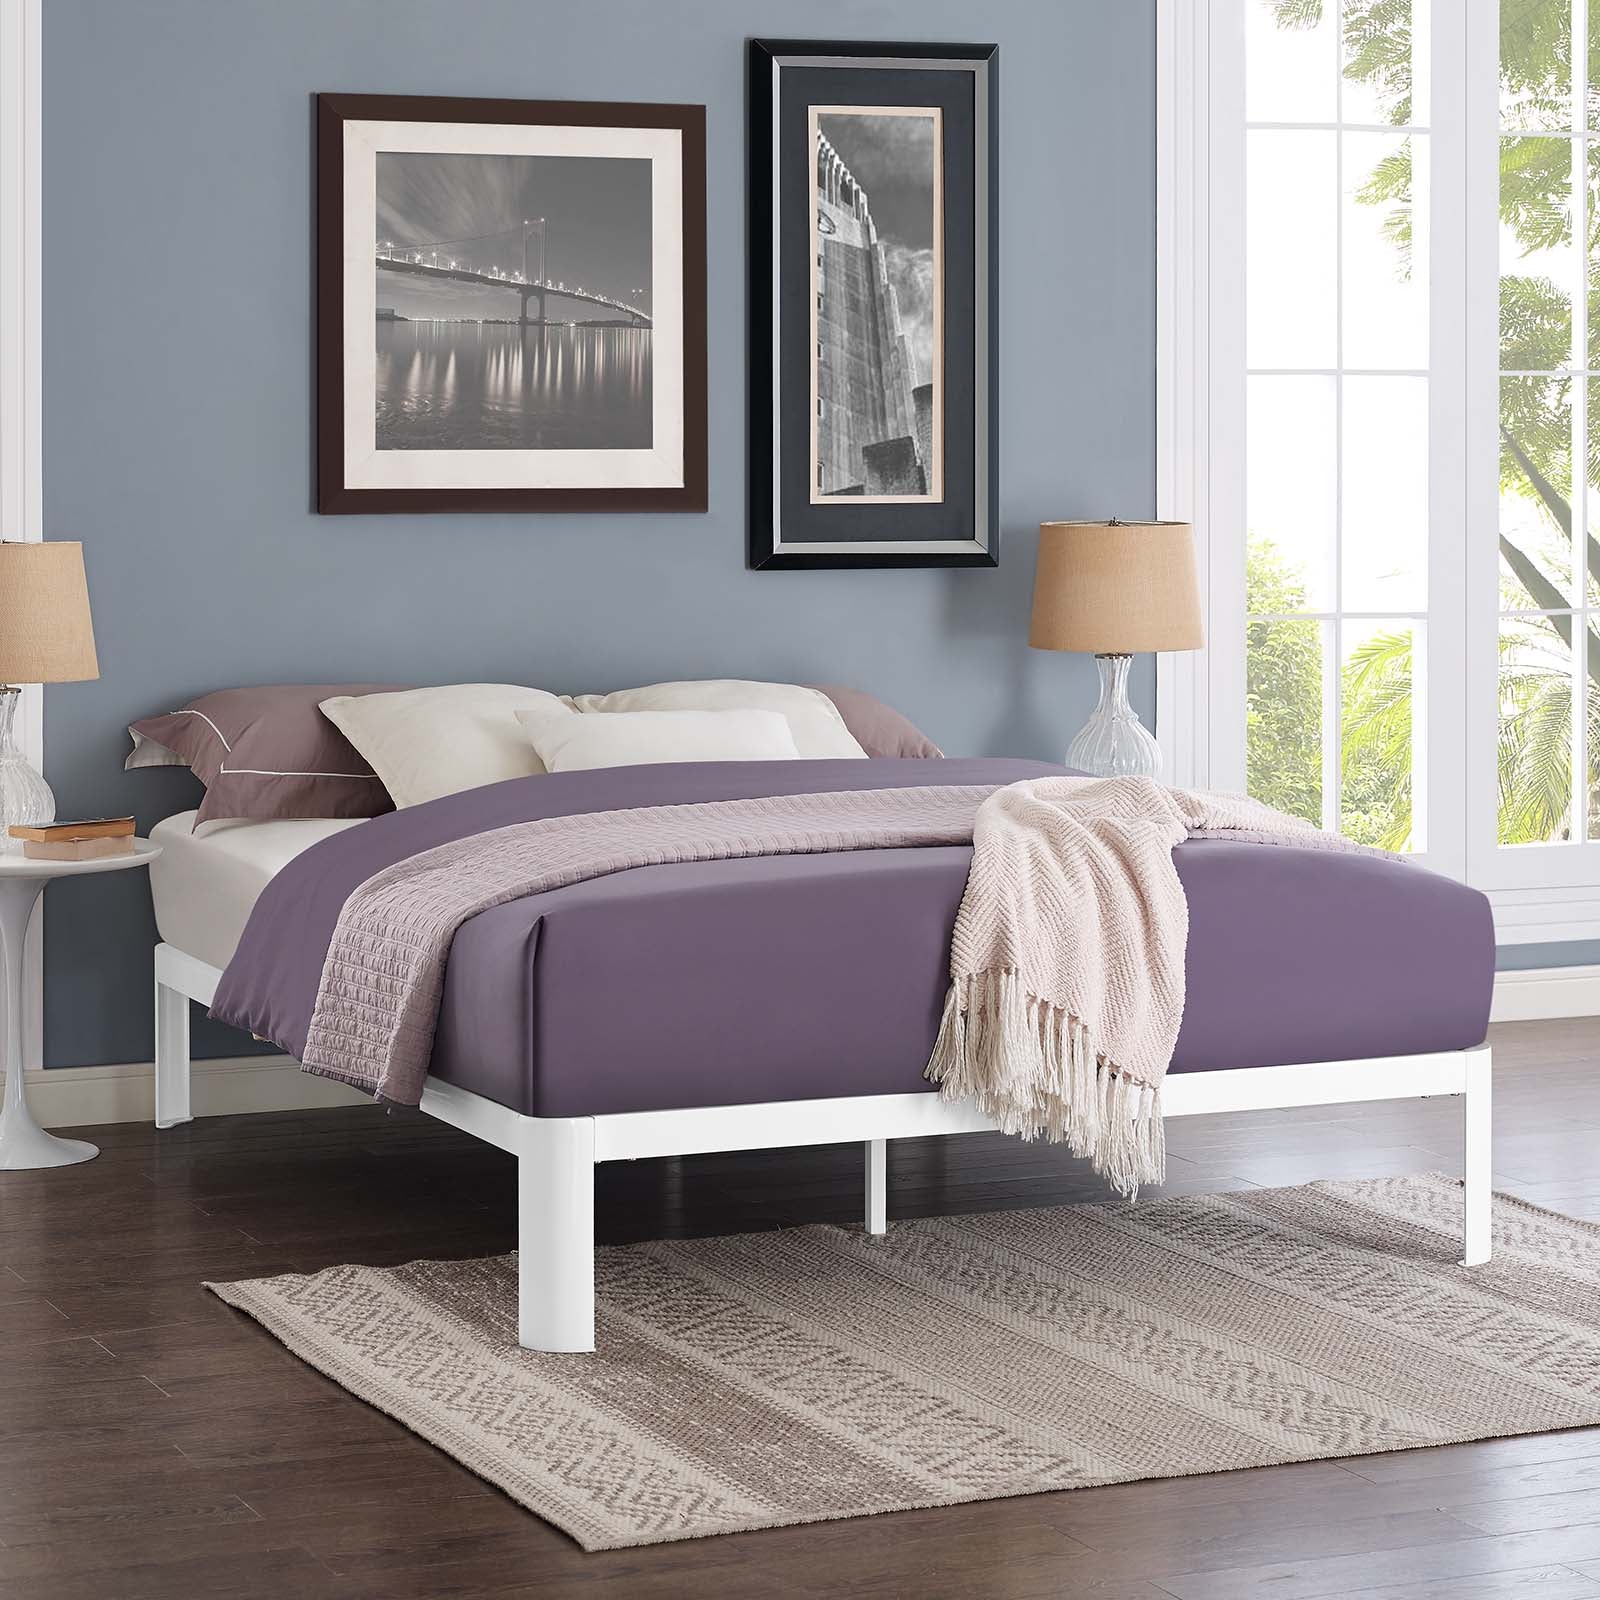 Modway Beds - Corinne Queen Bed Frame White